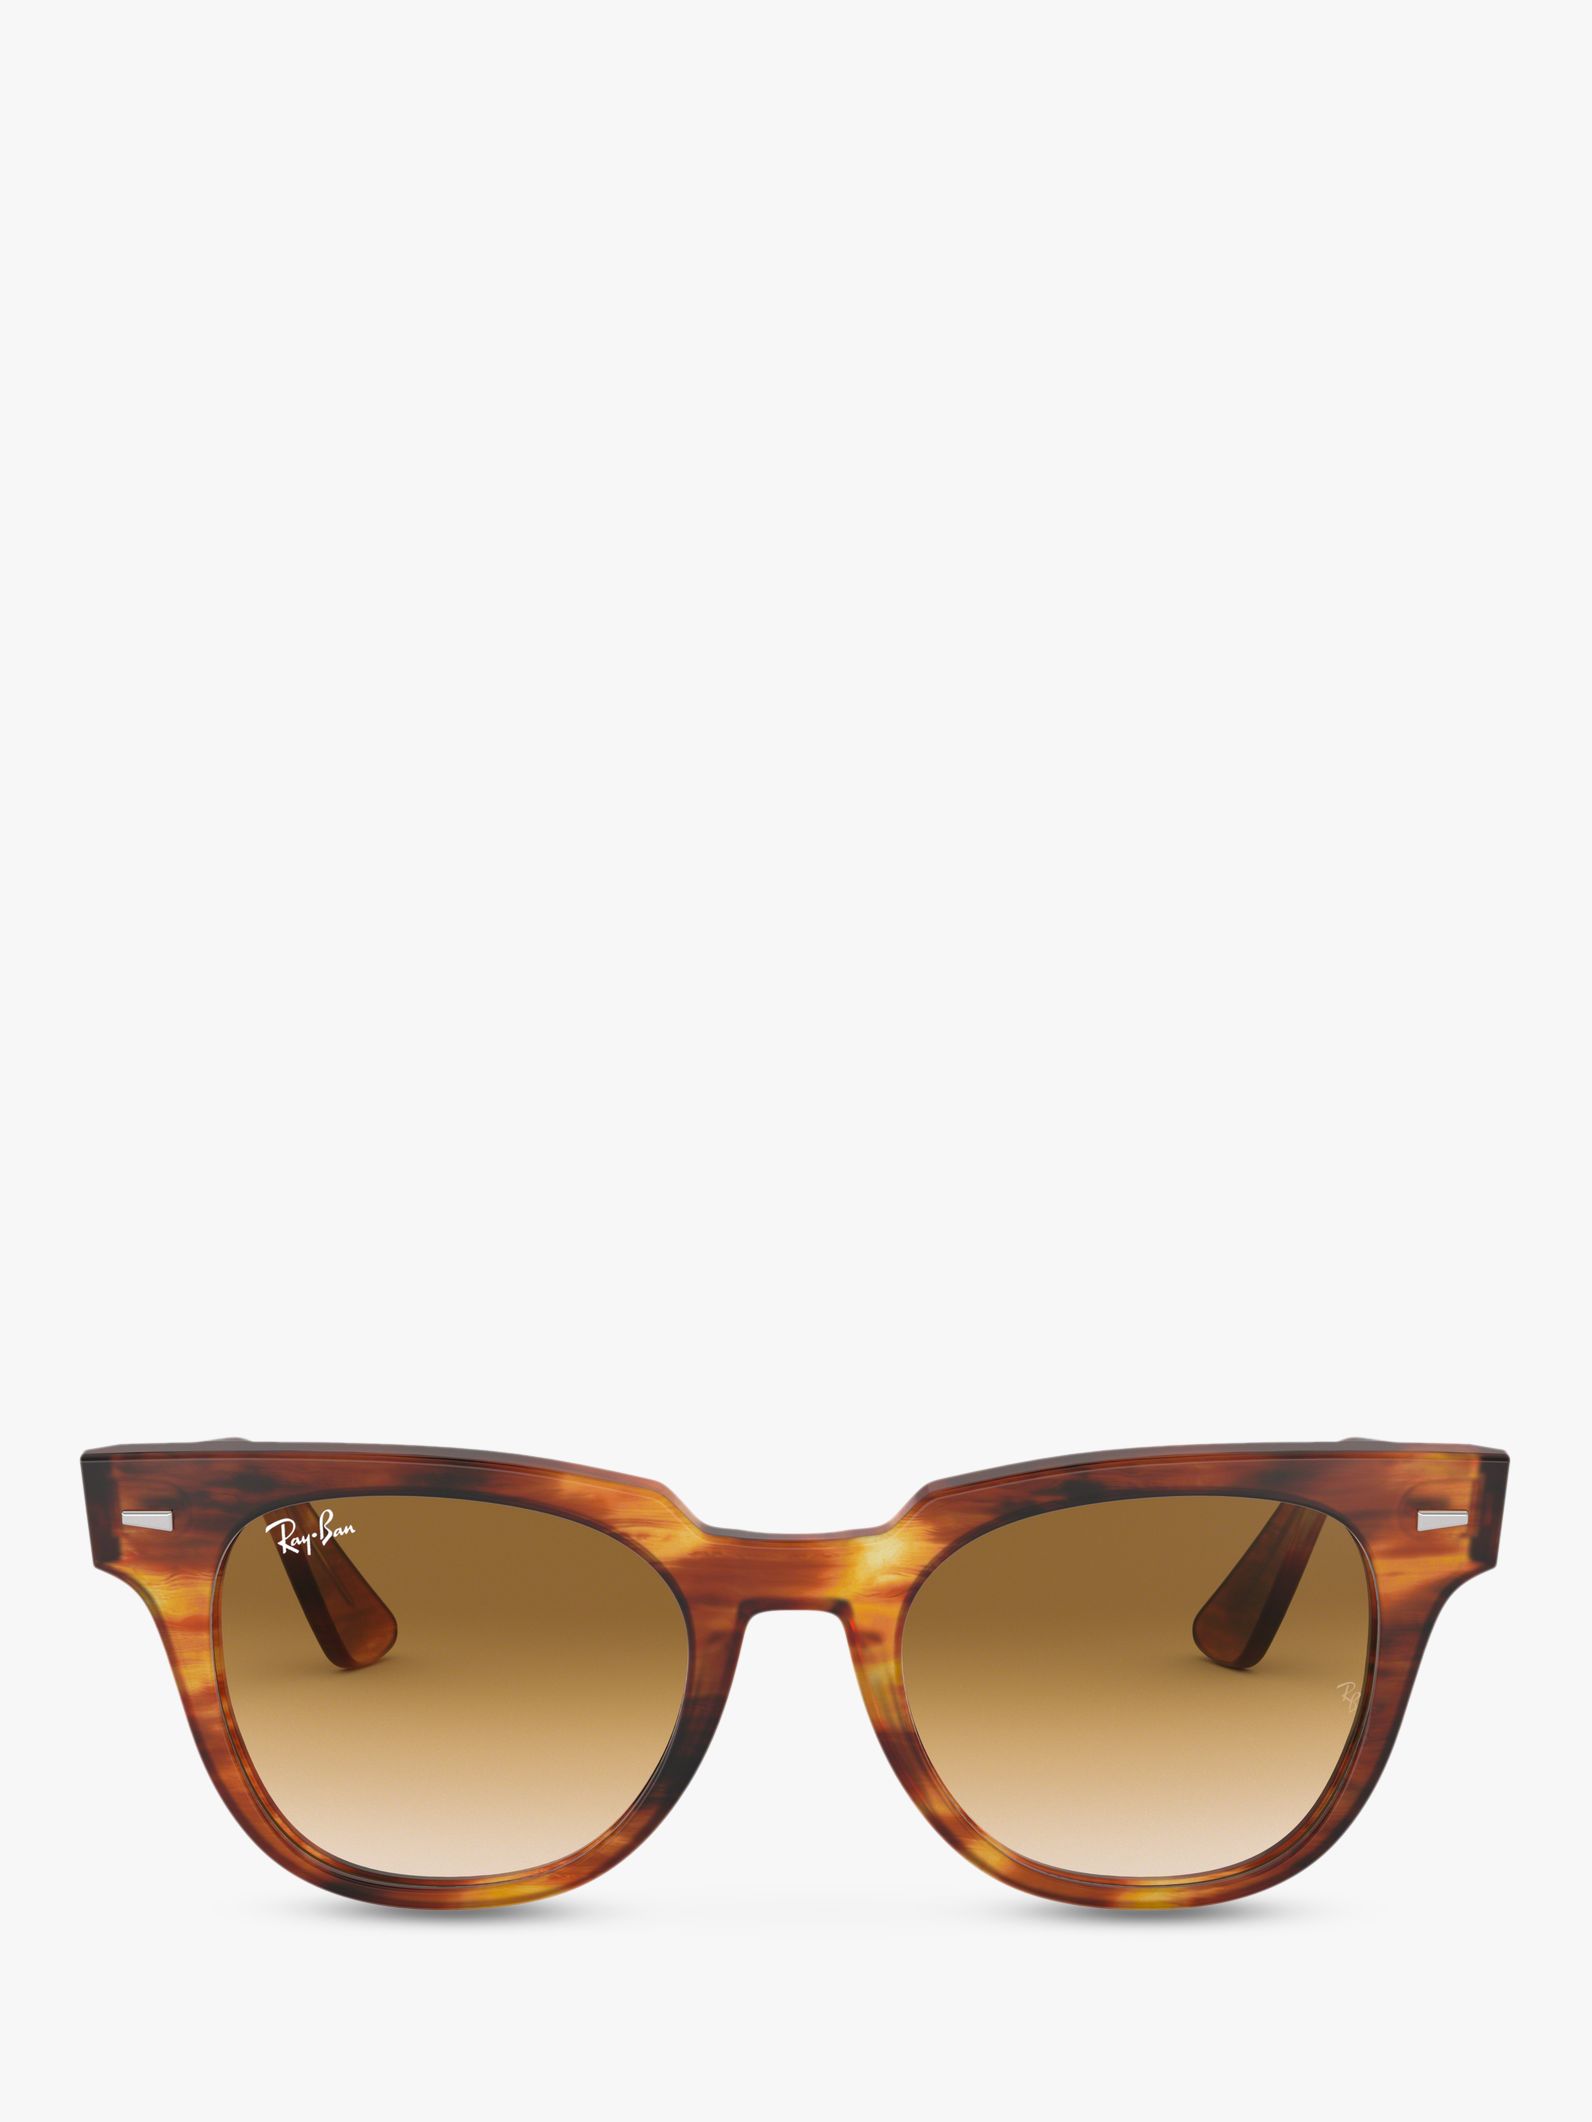 Ray Ban Rb2168 Unisex Square Sunglasses Striped Havanabrown At John Lewis And Partners 6733